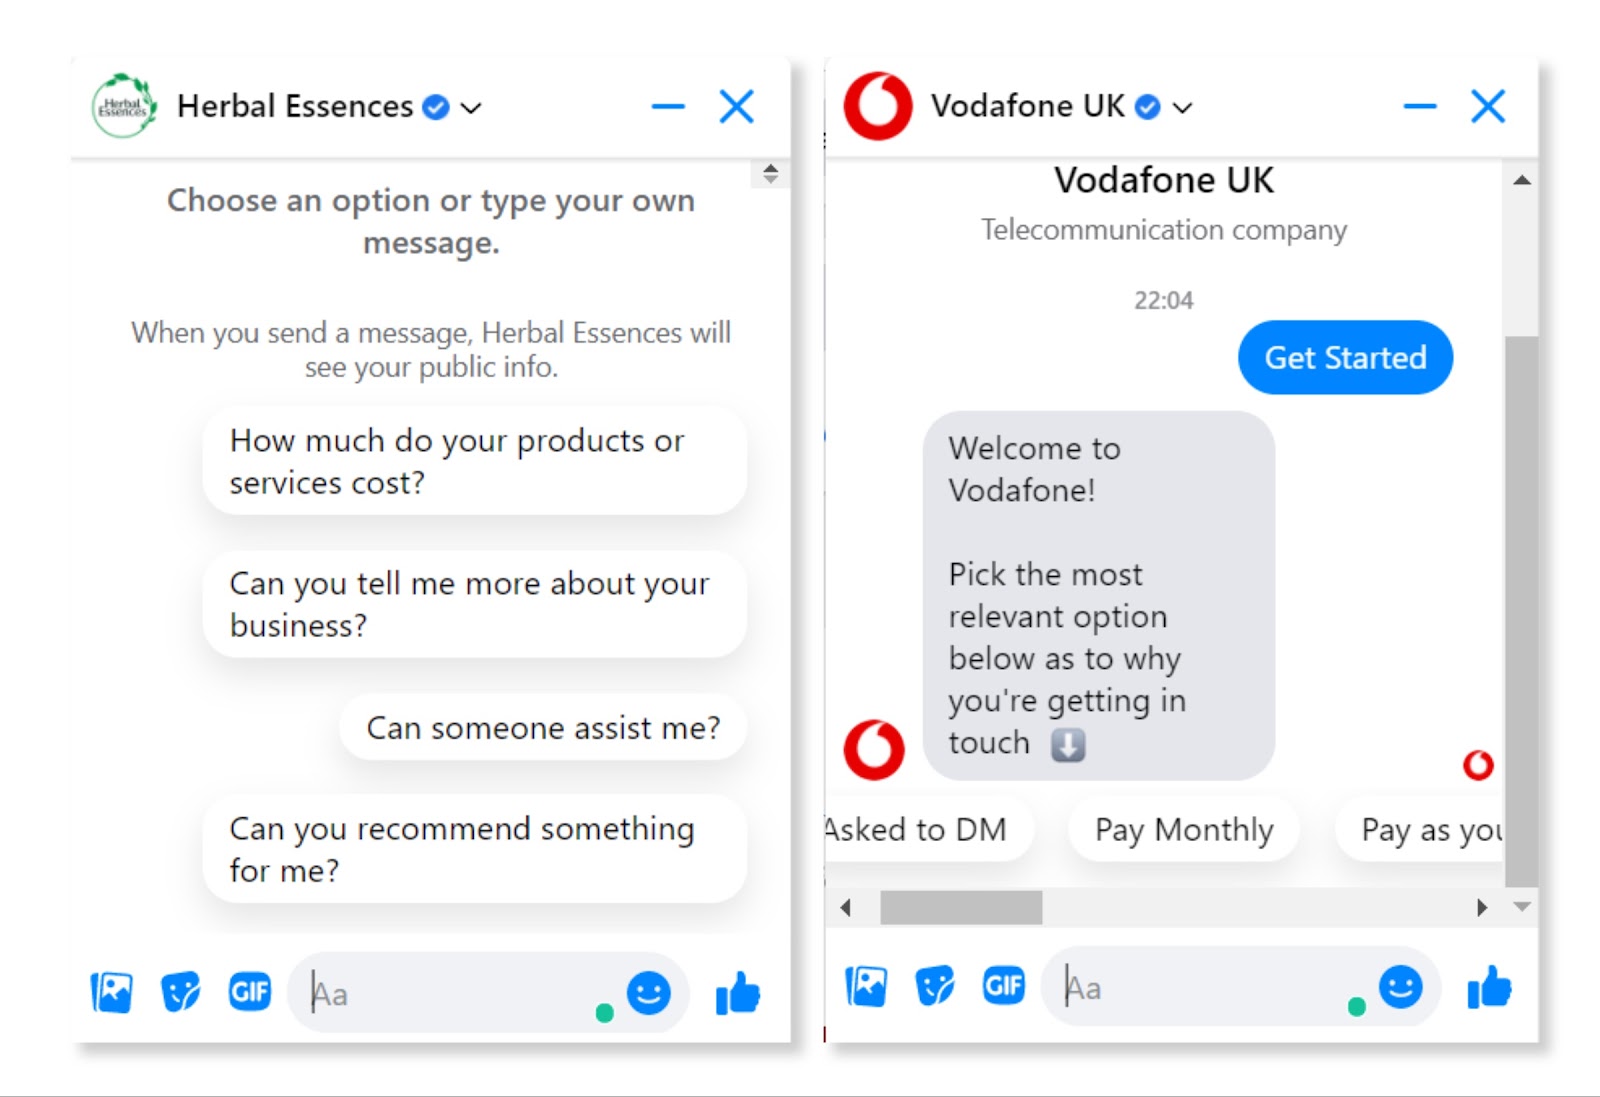 Vodafone UK automated replies on Facebook messanger